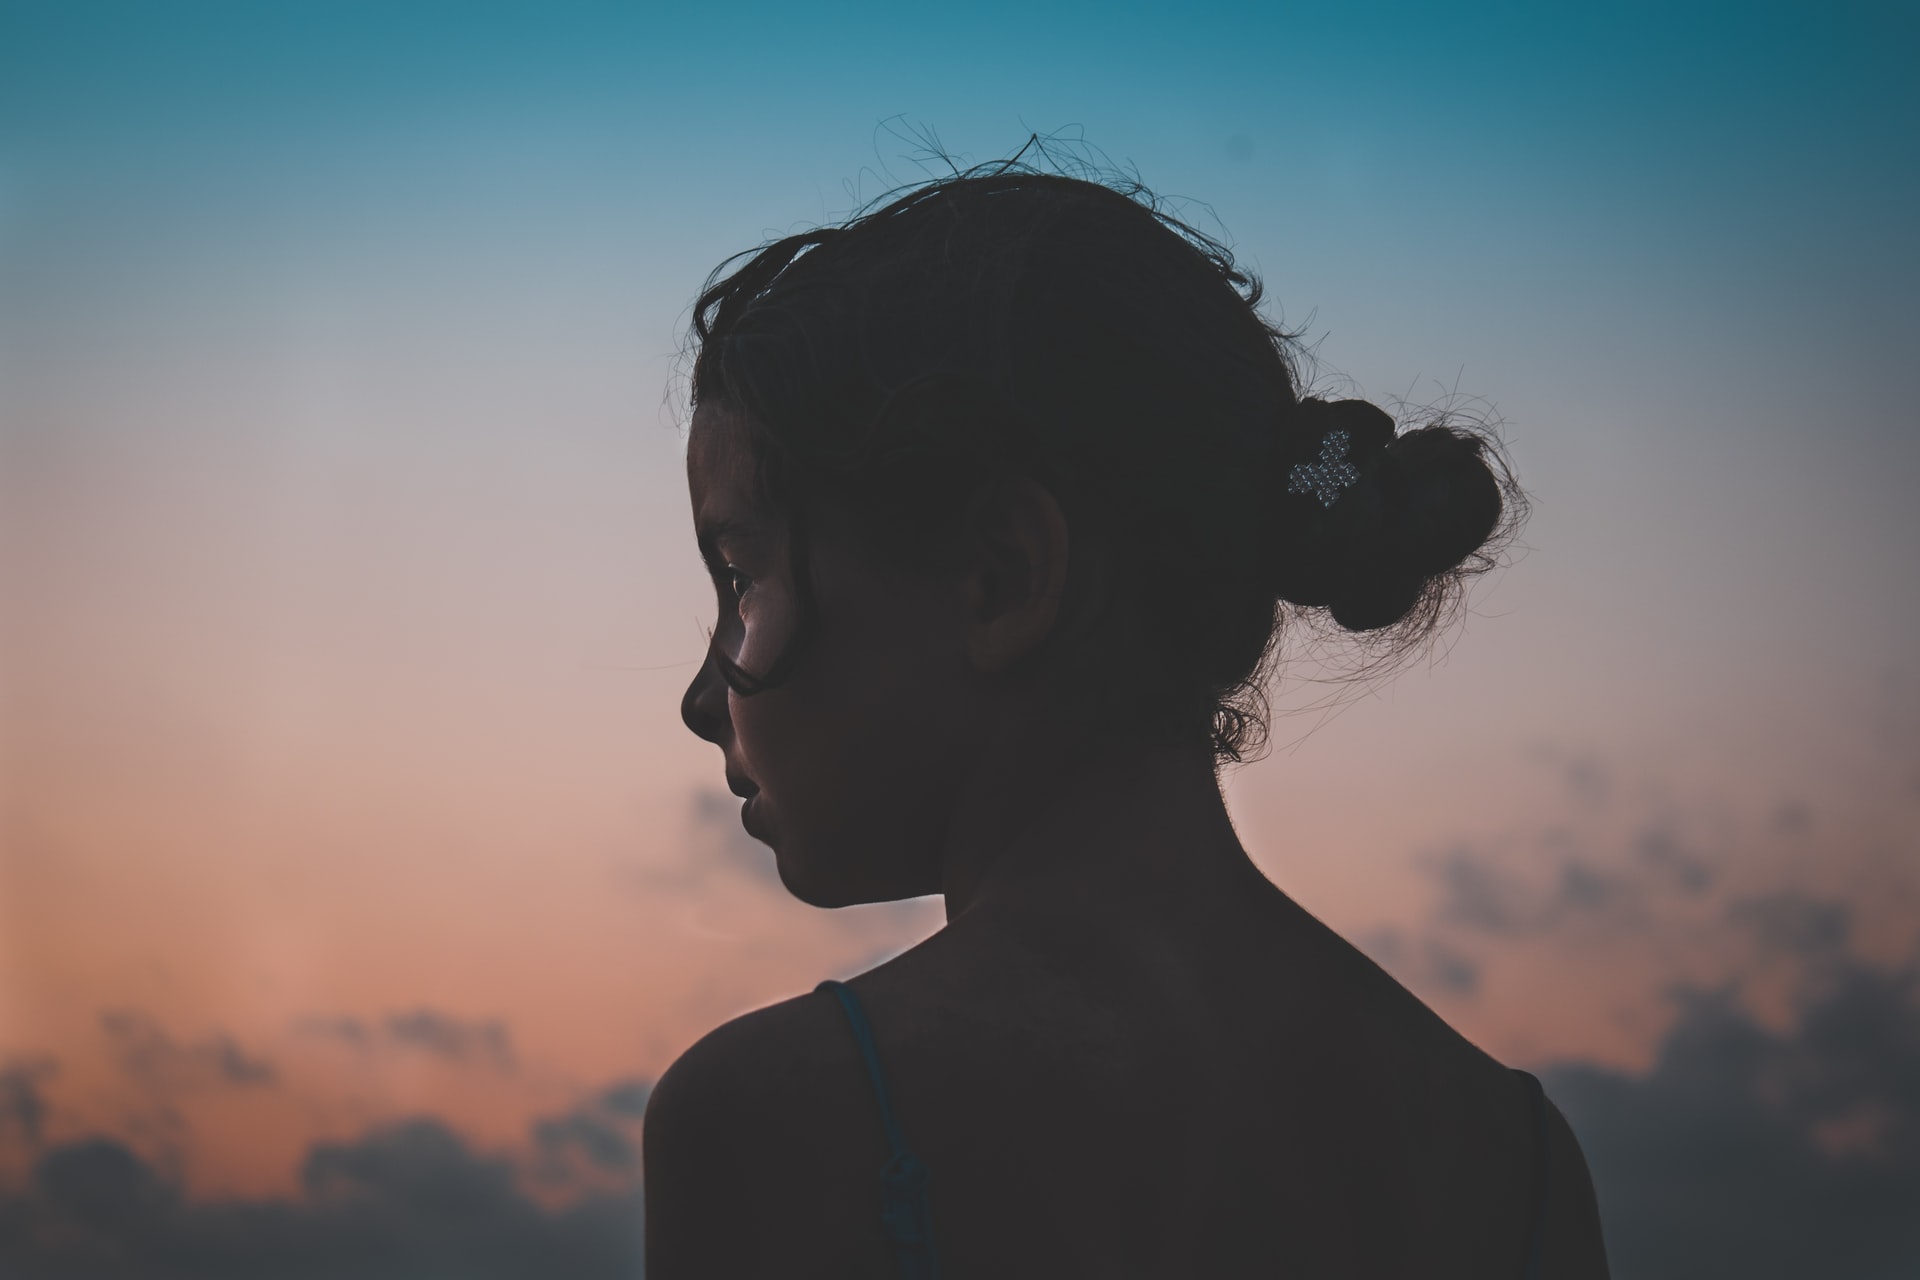 A silhouette of a girl against a sunset sky.